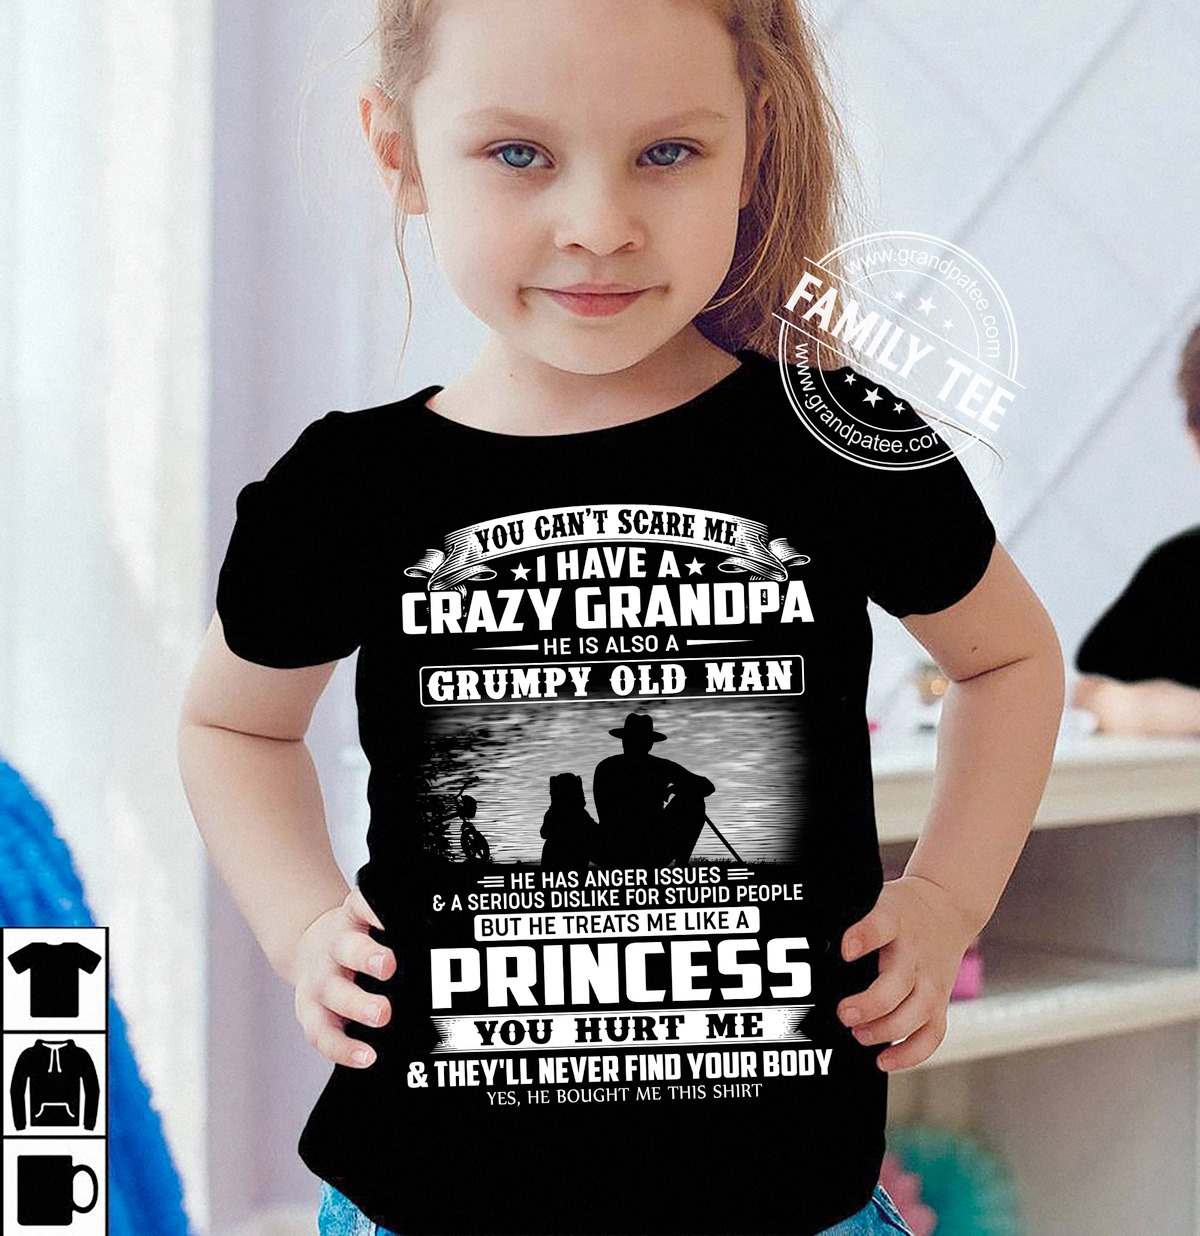 You can't scare me i have crazy grandpa he is also a grumpy old man but he treats me like a princess you hurt me